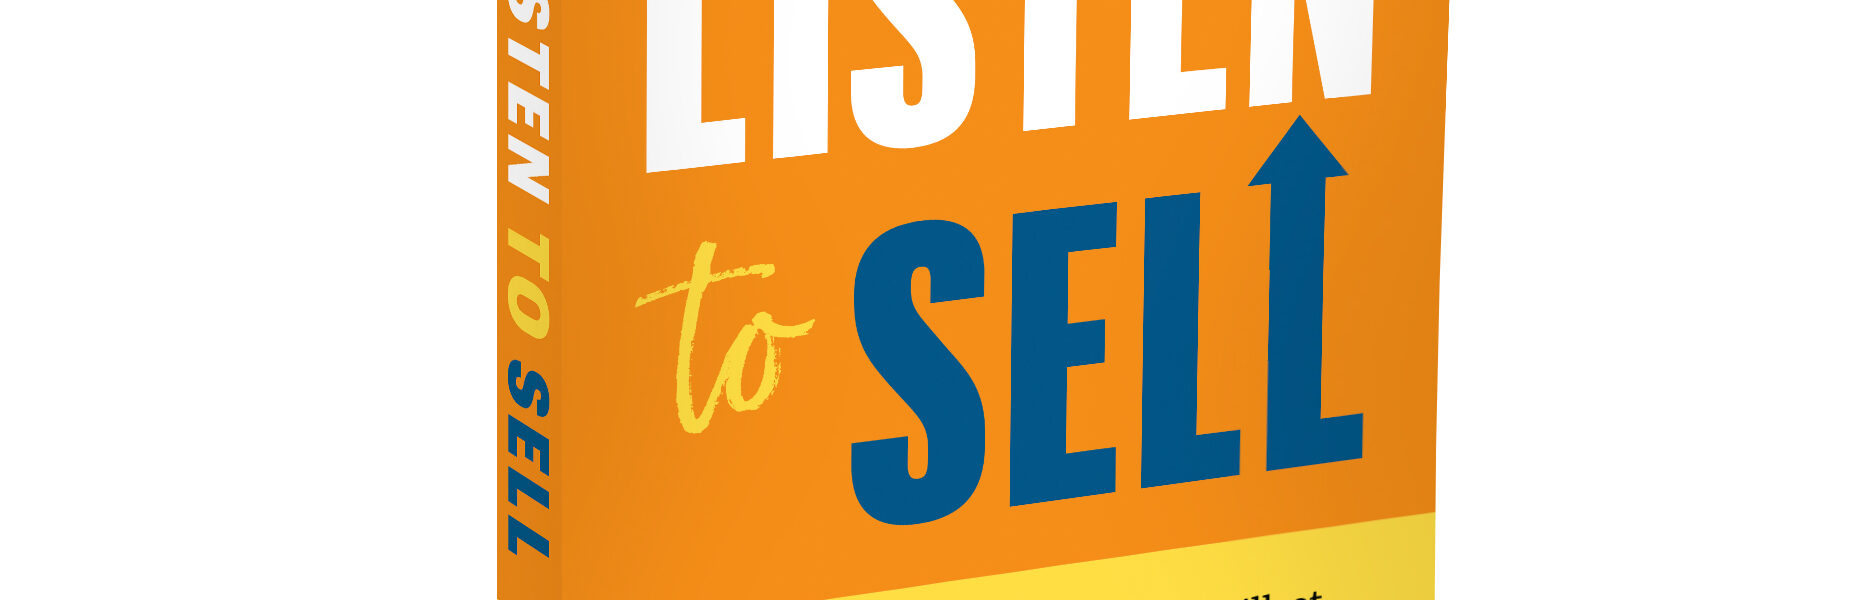 Listen to Sell Book